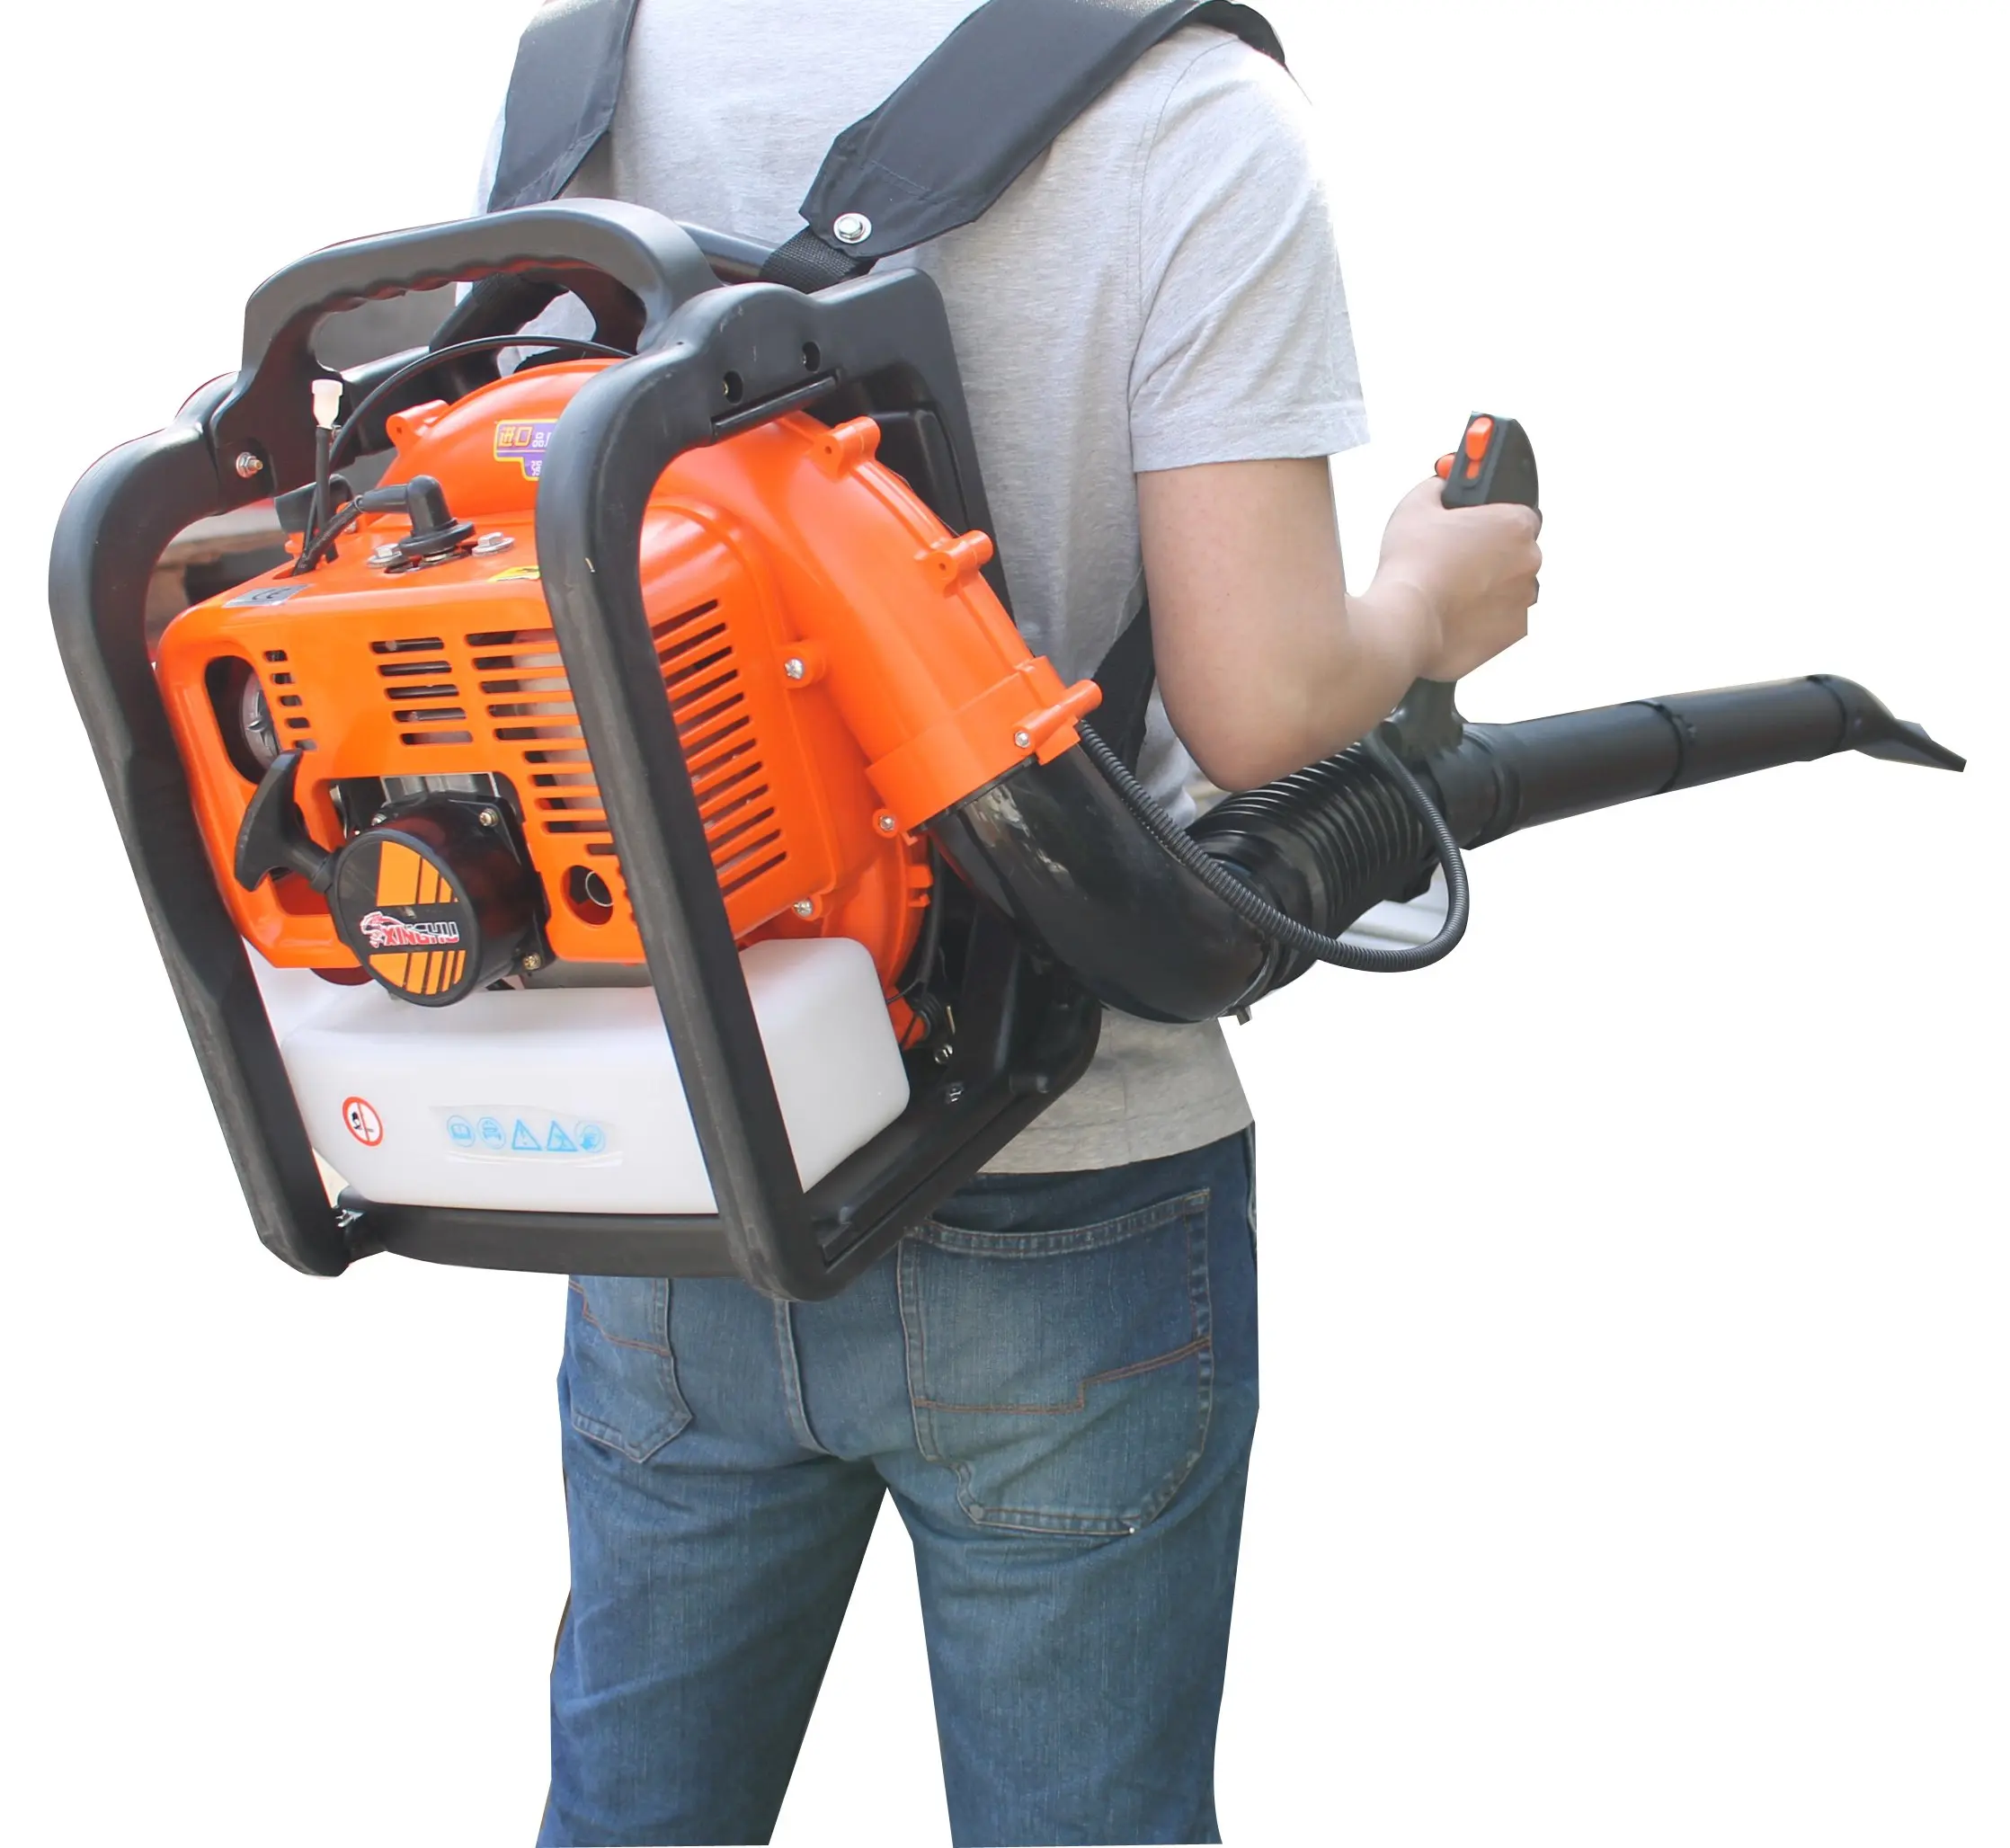 Cheap Cheap Gas Leaf Blowers, find Cheap Gas Leaf Blowers deals on line at 0